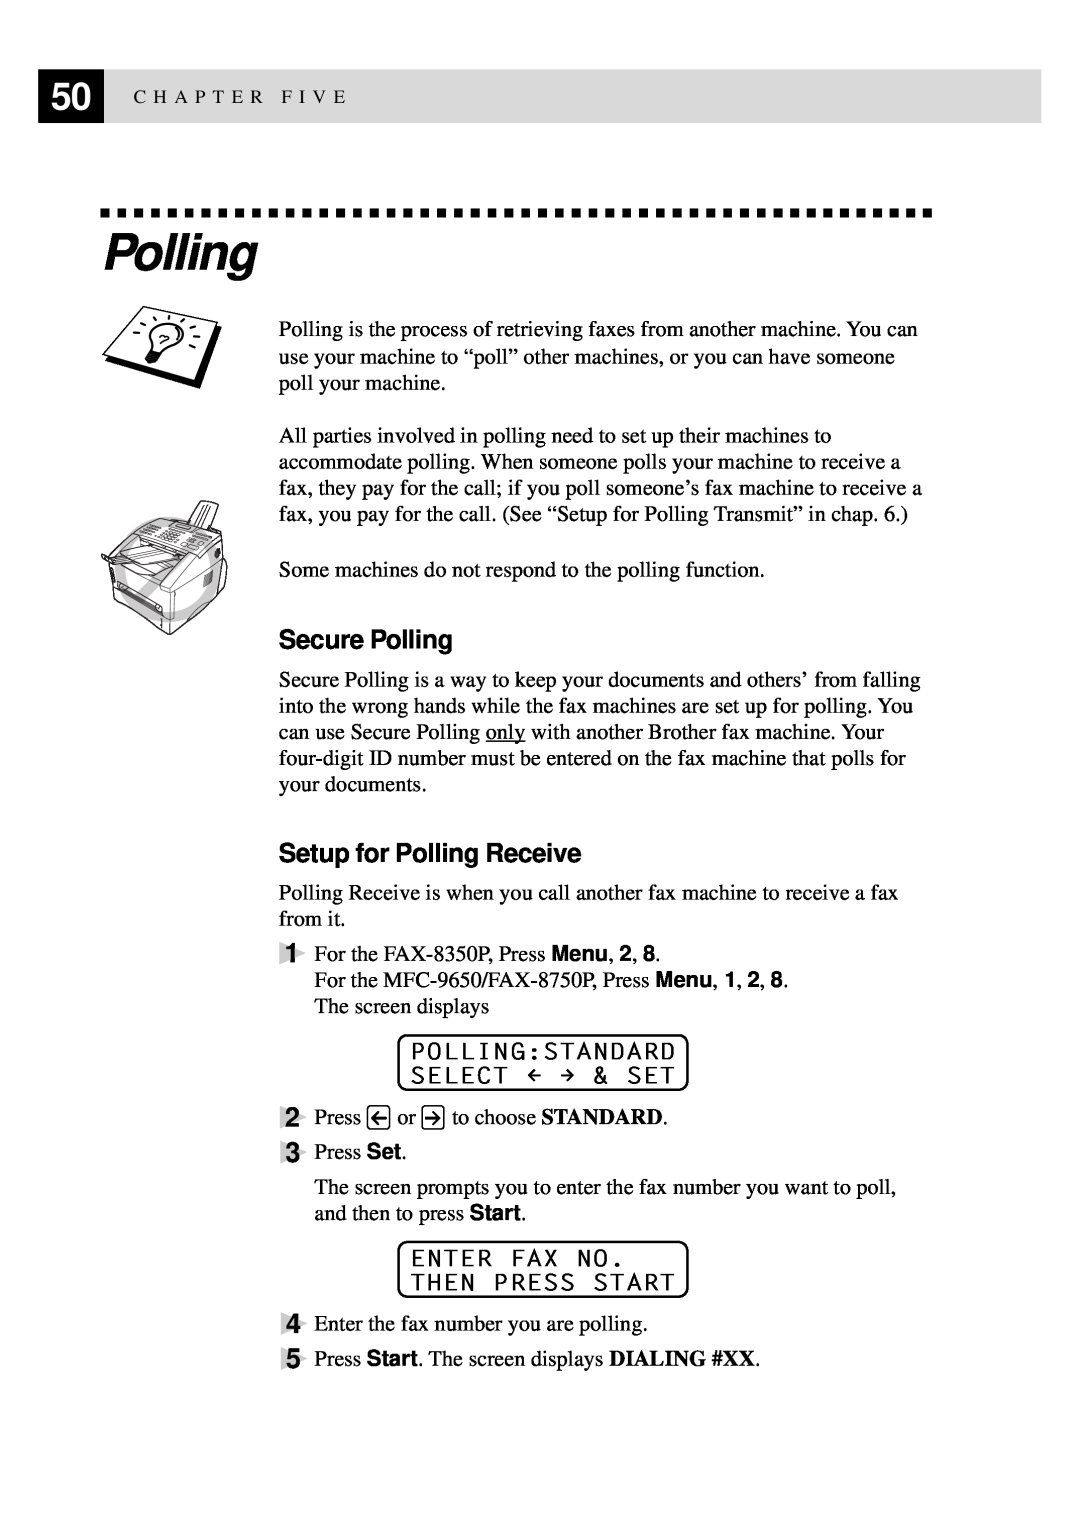 Brother FAX-8350P, MFC-9650 owner manual Secure Polling, Setup for Polling Receive, Pollingstandard Select & Set 